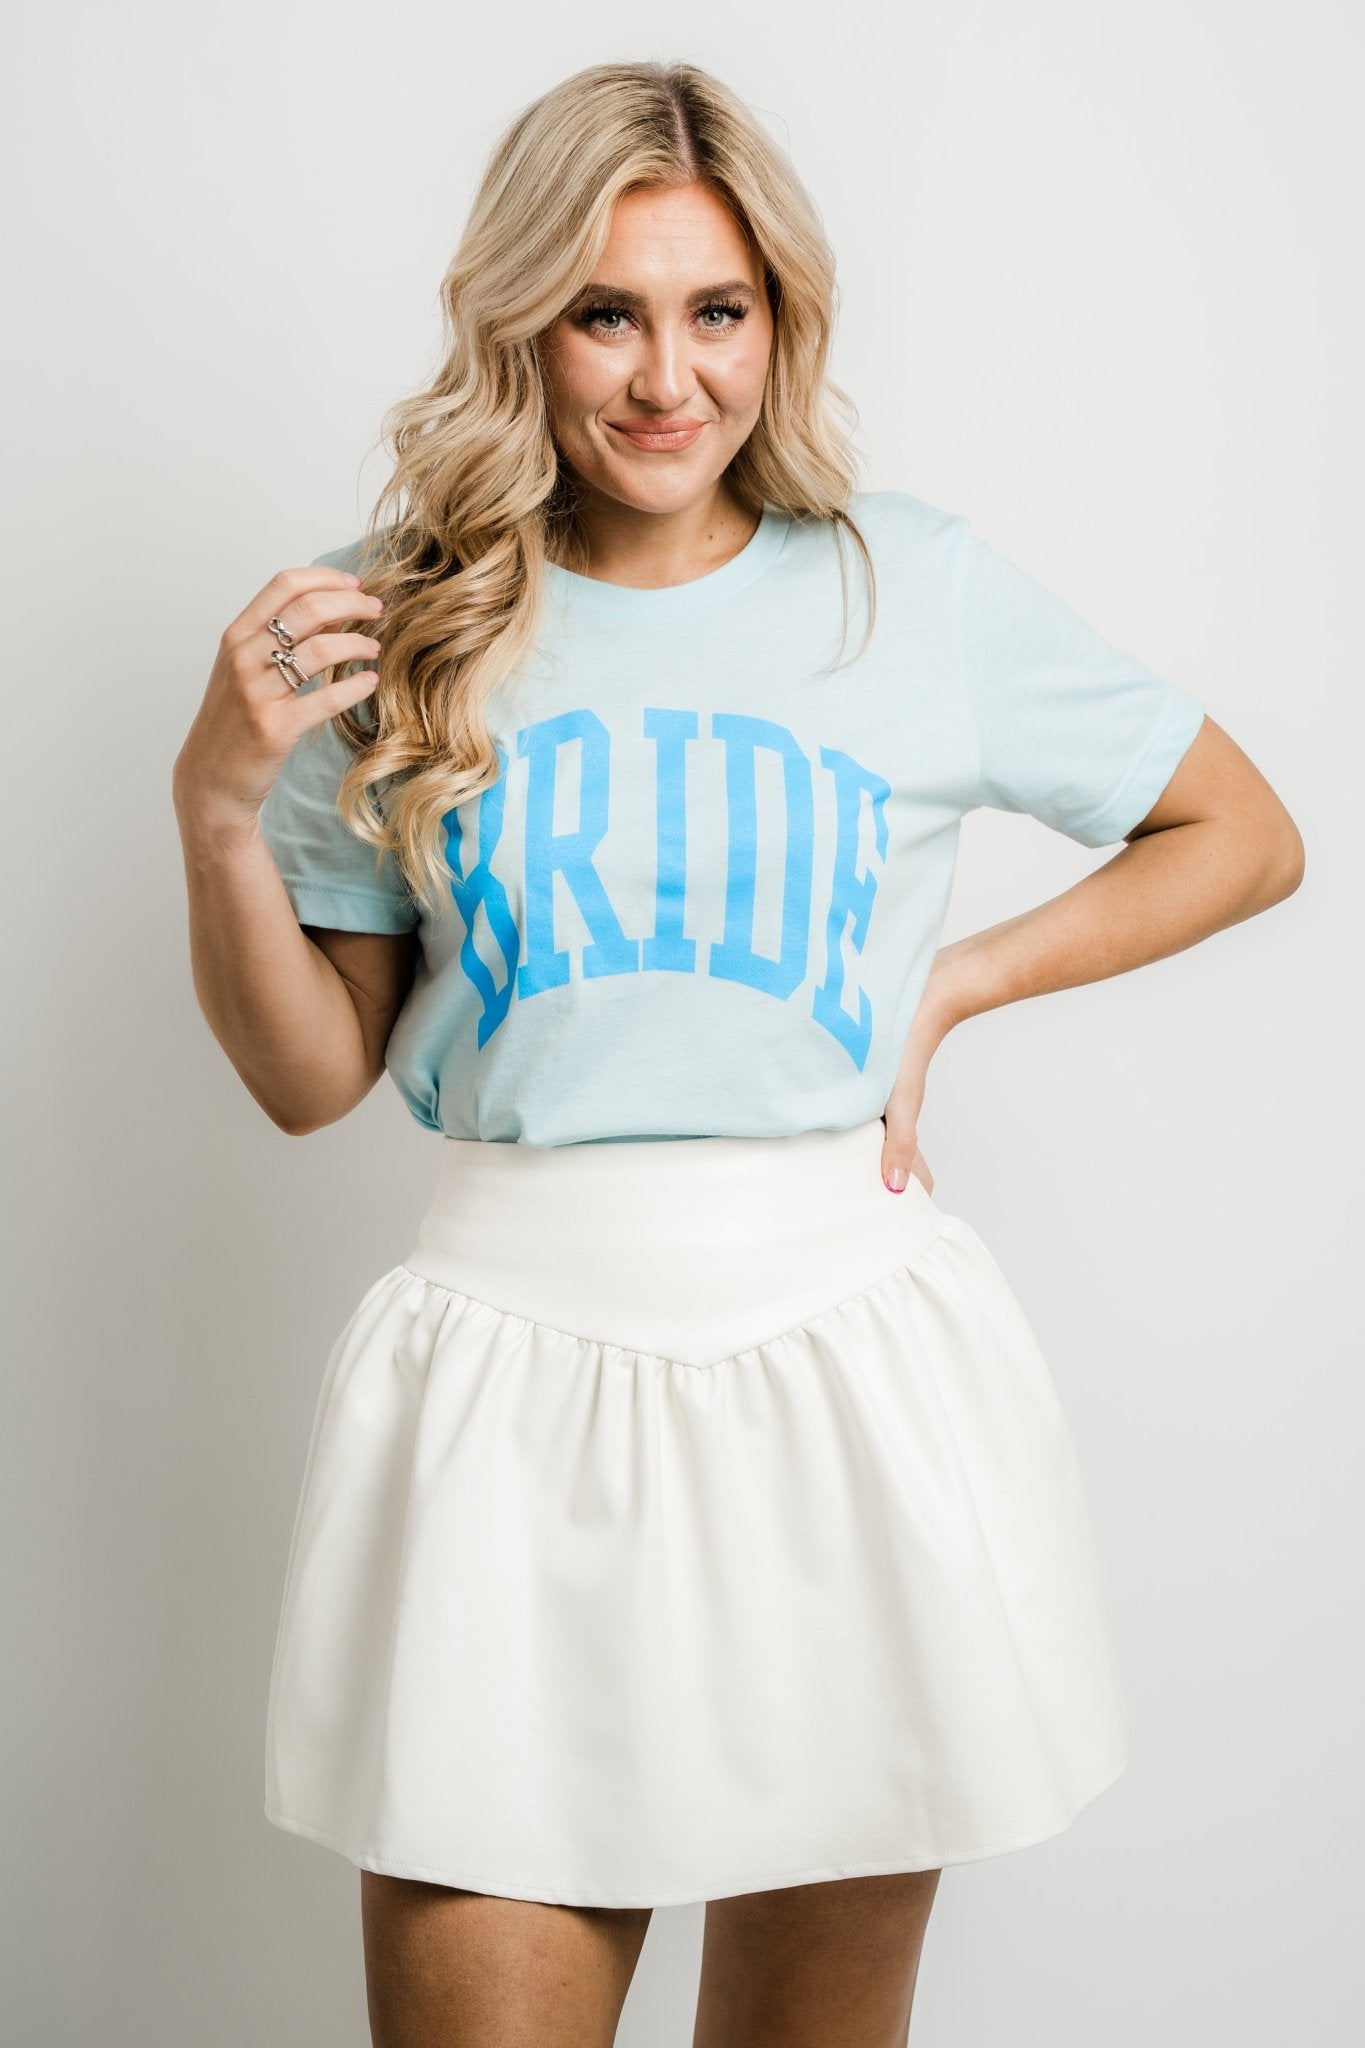 Bride XL short sleeve crew ice blue - Cute T-shirts - Trendy Bride and Bridesmaid Fashion at Lush Fashion Lounge Boutique in Oklahoma